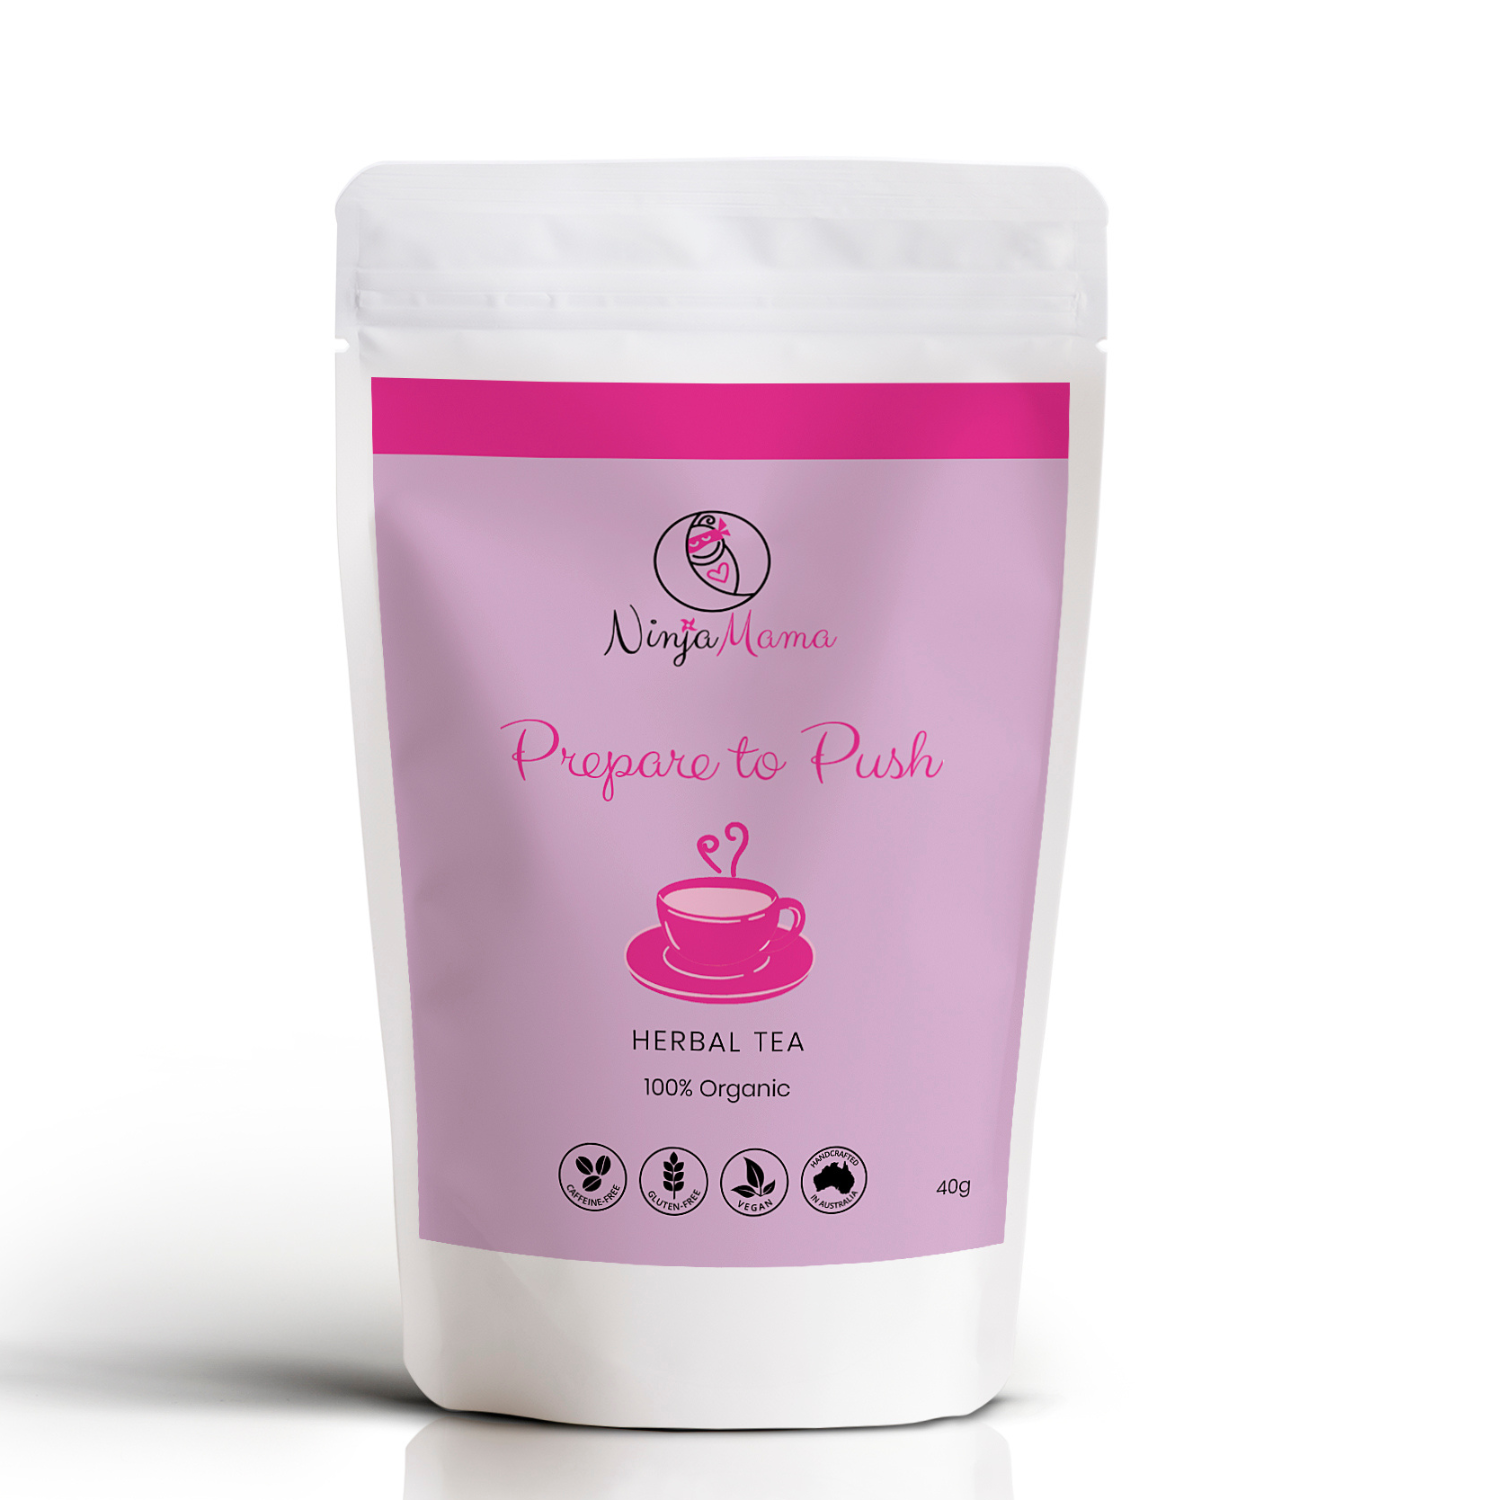 Wholesale Ninja Mama Postpartum Perineal Care Recovery Wipes. Postpartum  Relief After Birth Tears and Haemorrhoids. Pack of 45. - Ninja Mama -  Fieldfolio